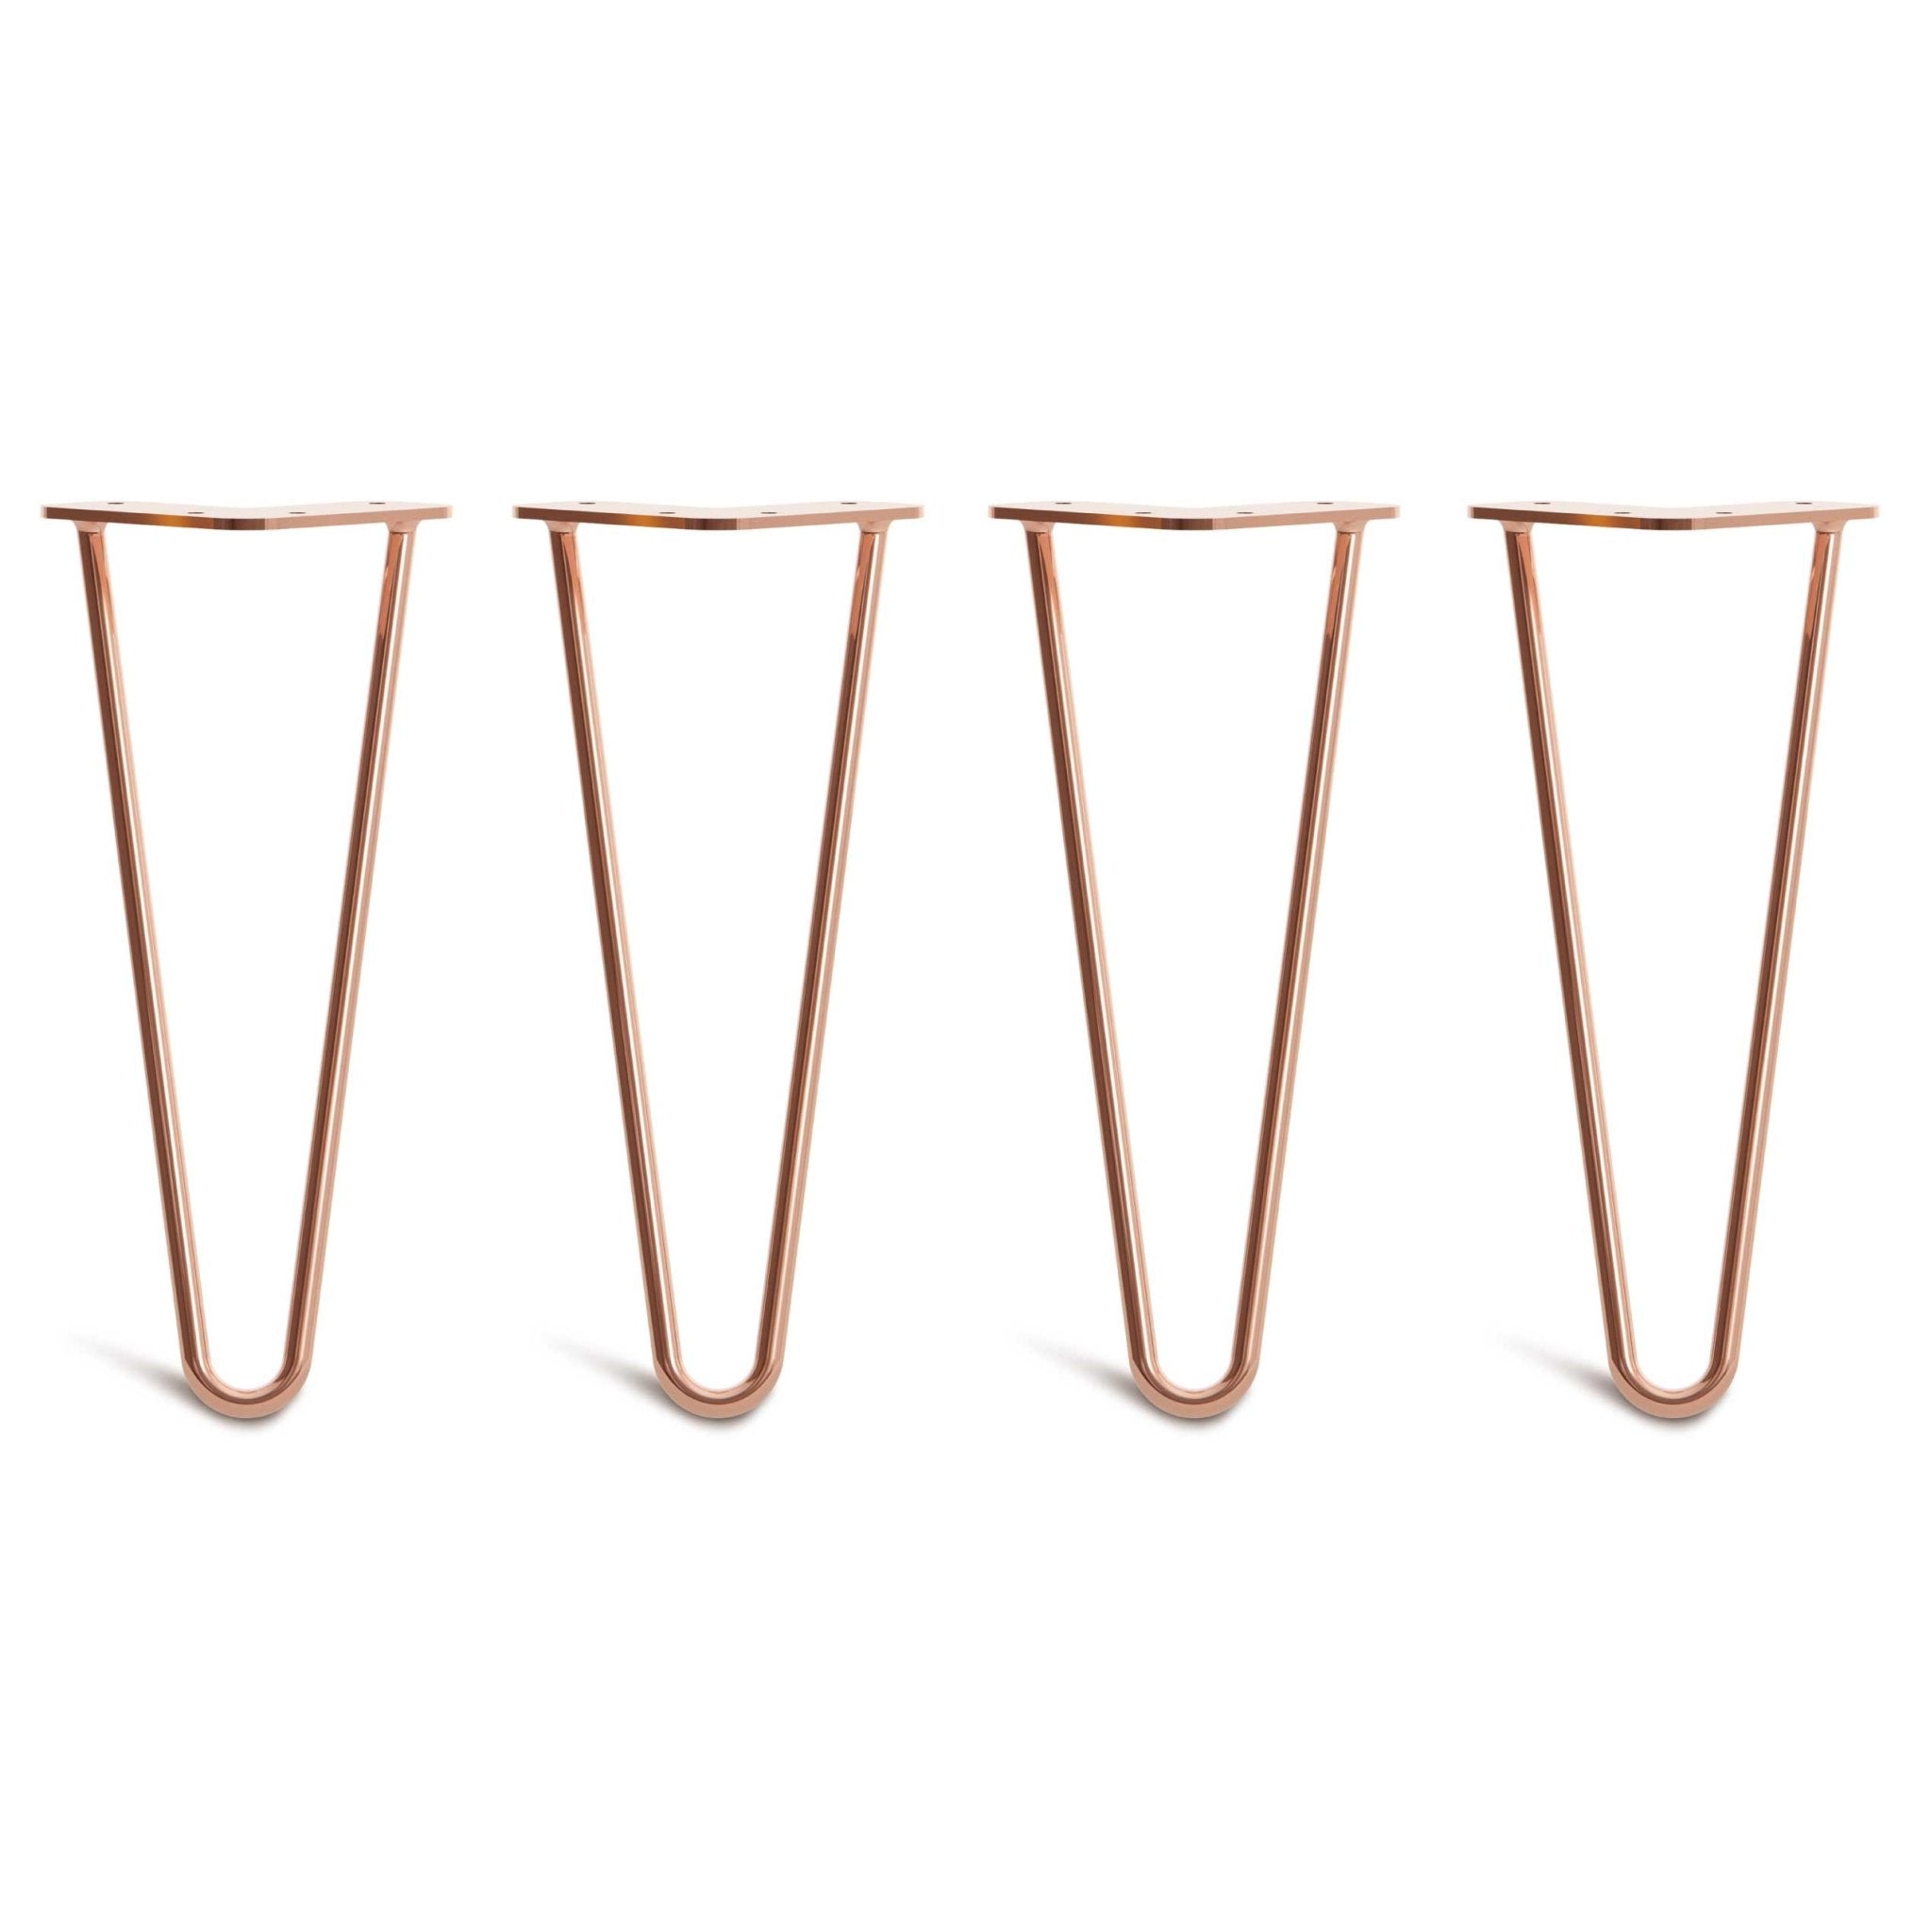 30cm Hairpin Legs - Low Coffee Table-2 Rod-Copper-The Hairpin Leg Co.